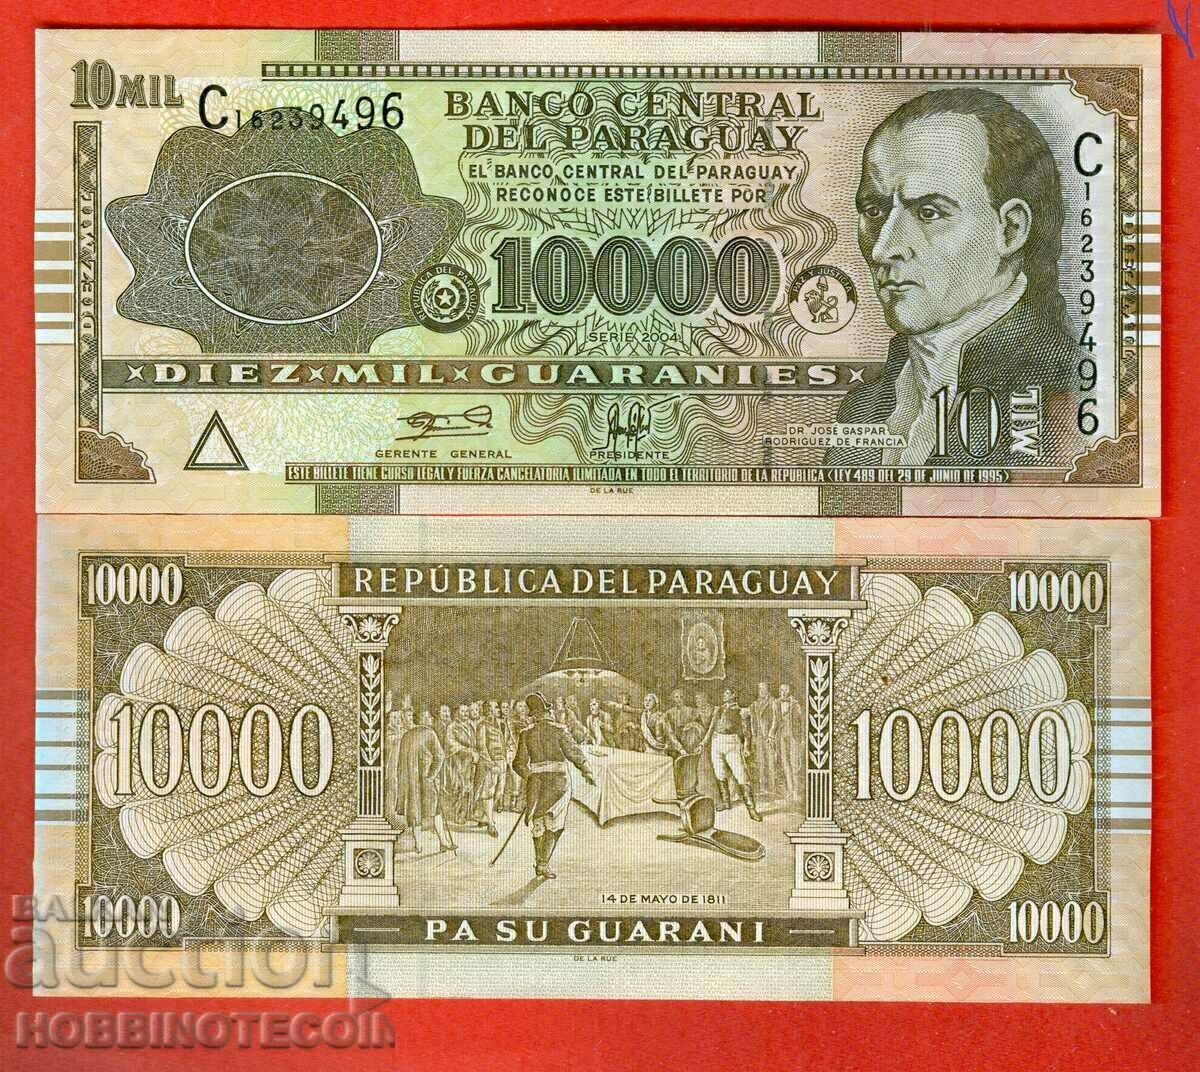 PARAGUAY PARAGUAY 10000 10,000 issue issue 2004 NEW UNC